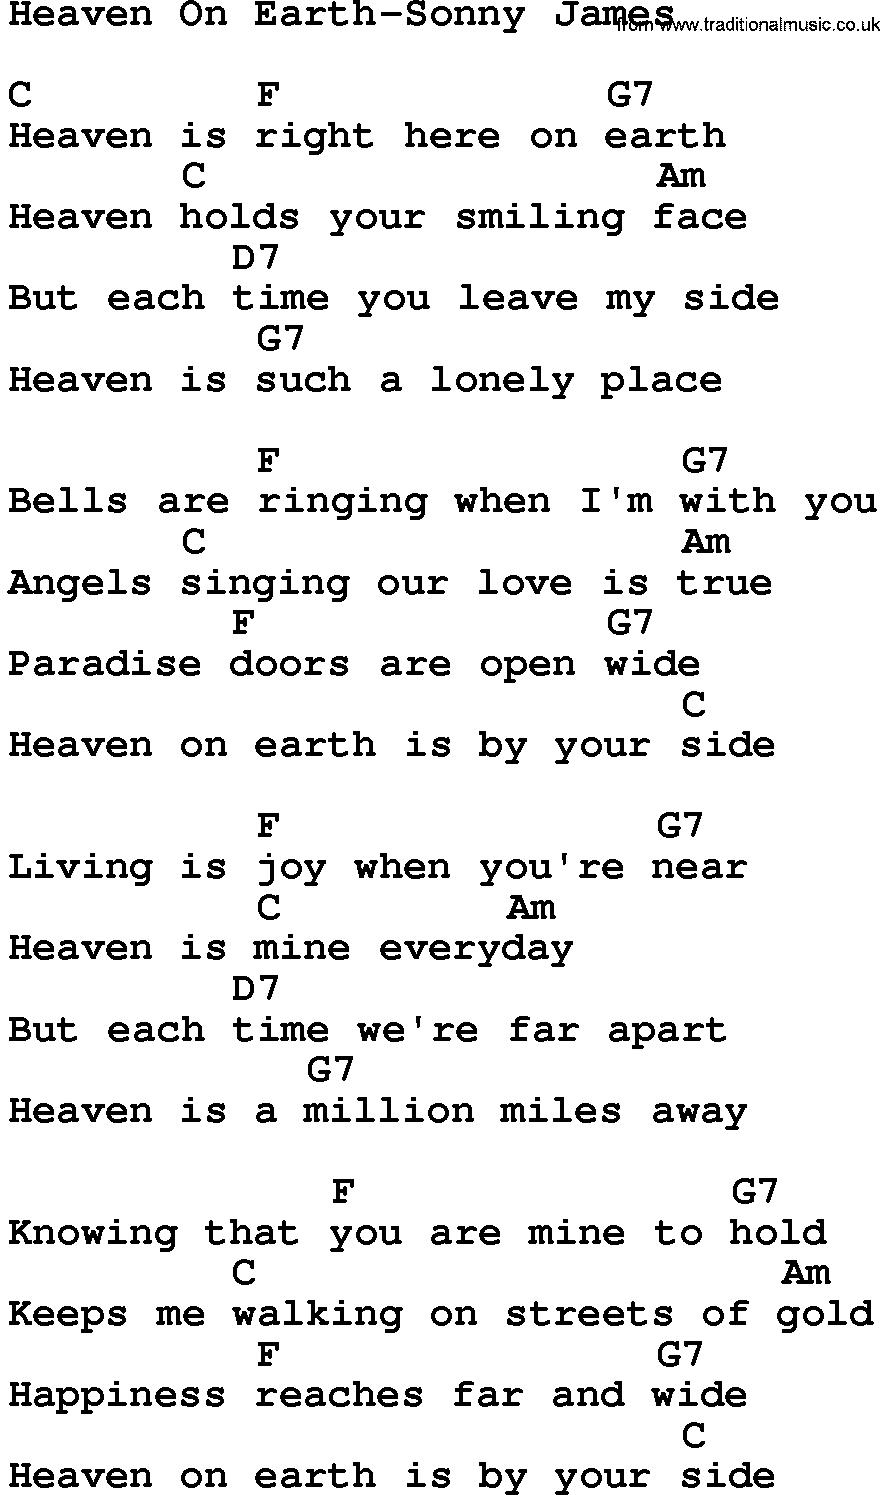 Country music song: Heaven On Earth-Sonny James lyrics and chords